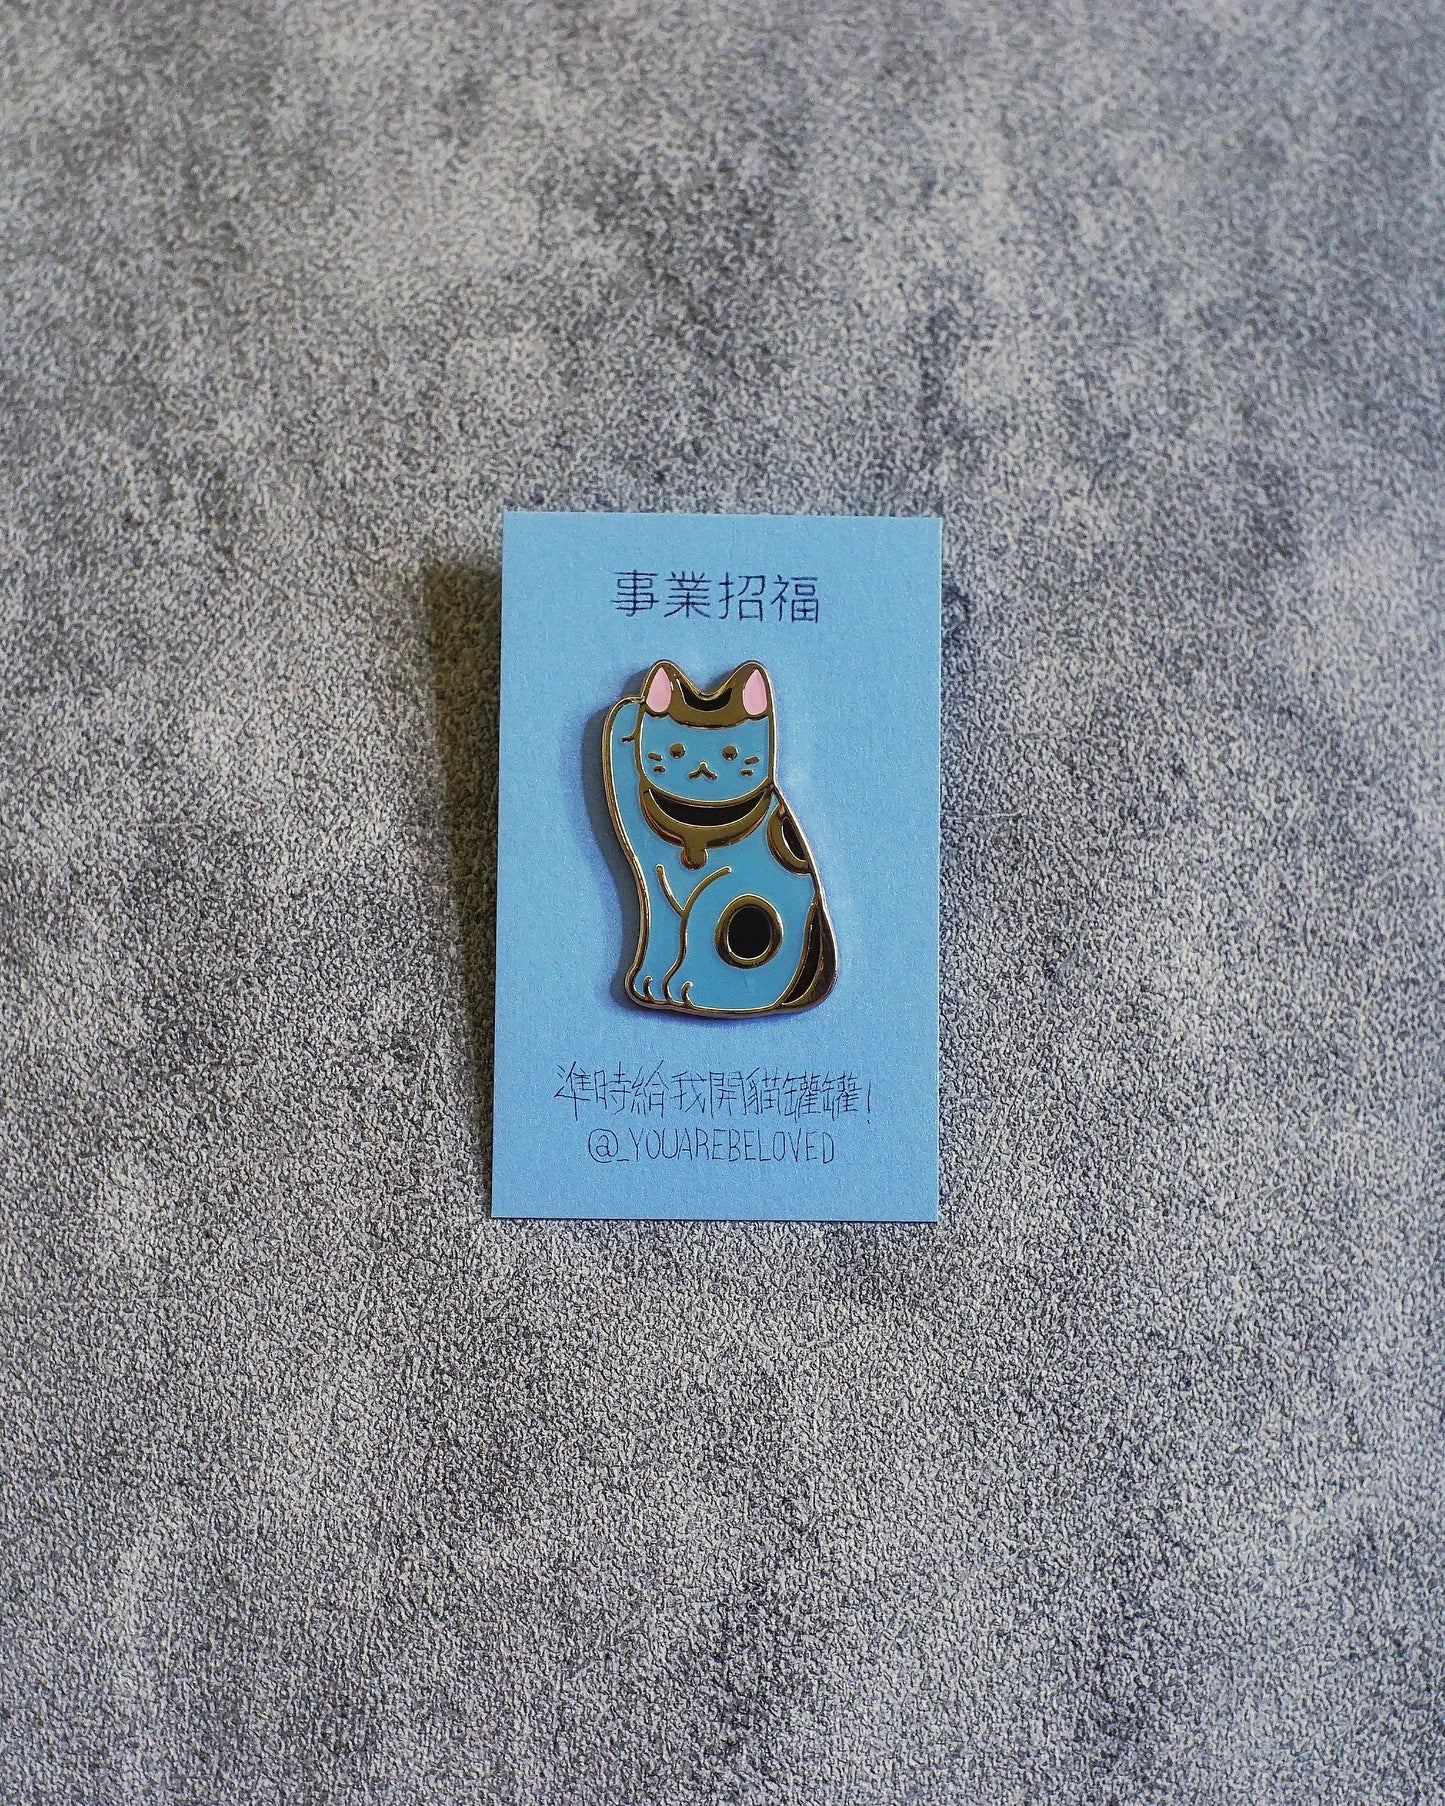 Lucky Cat Meow Meow Pin 